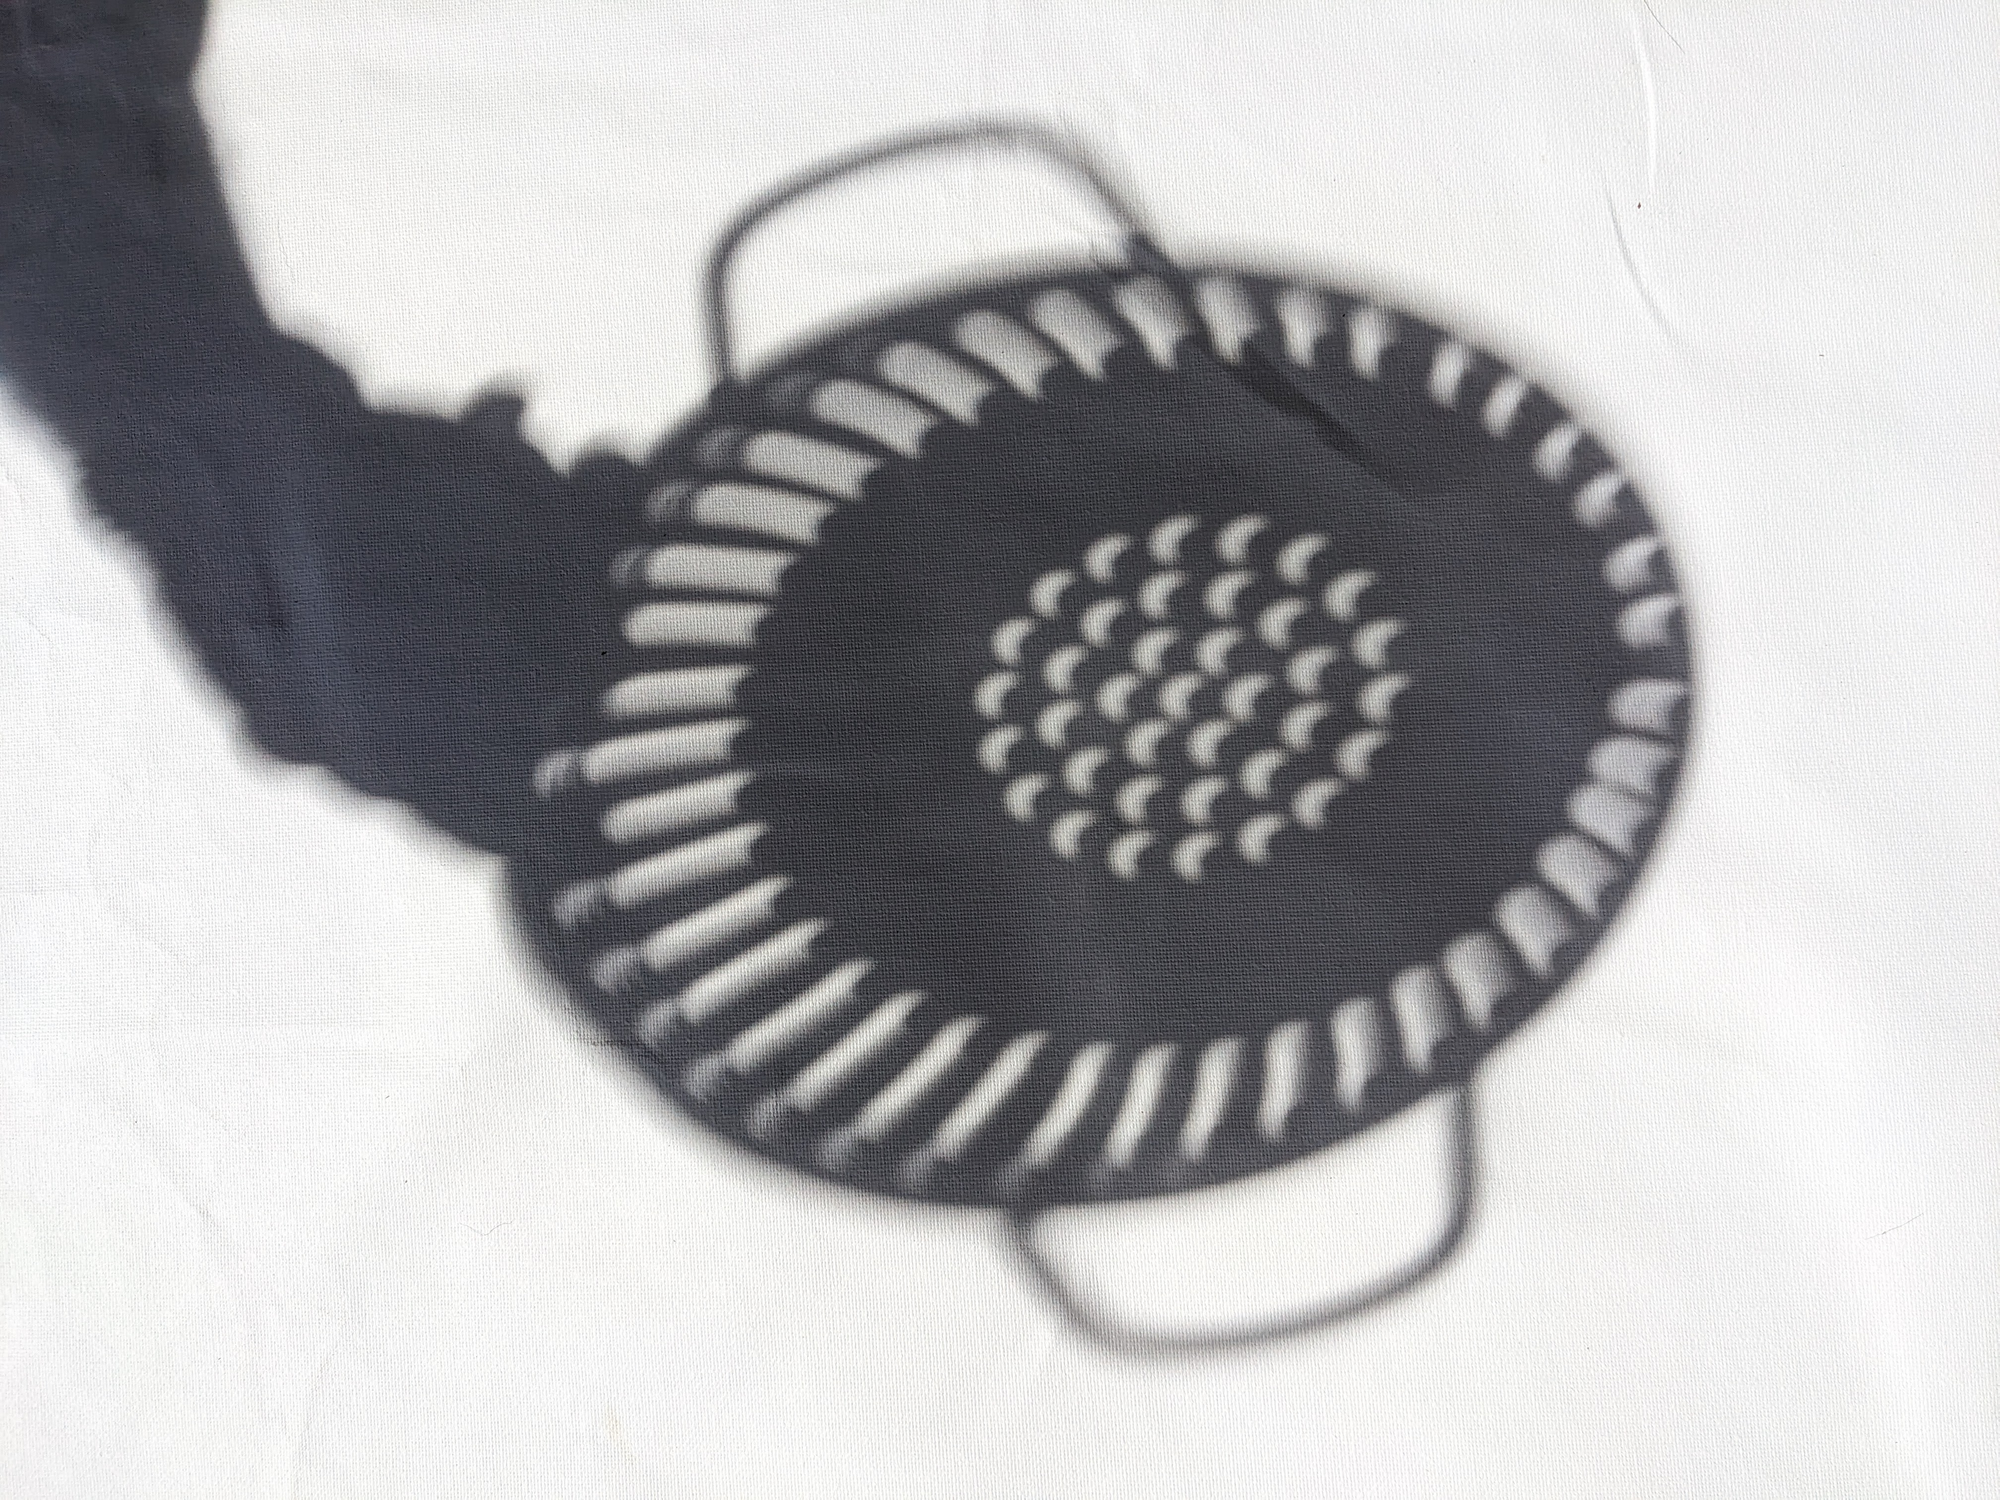 The solar eclipse seen in the shadow made by a colander.